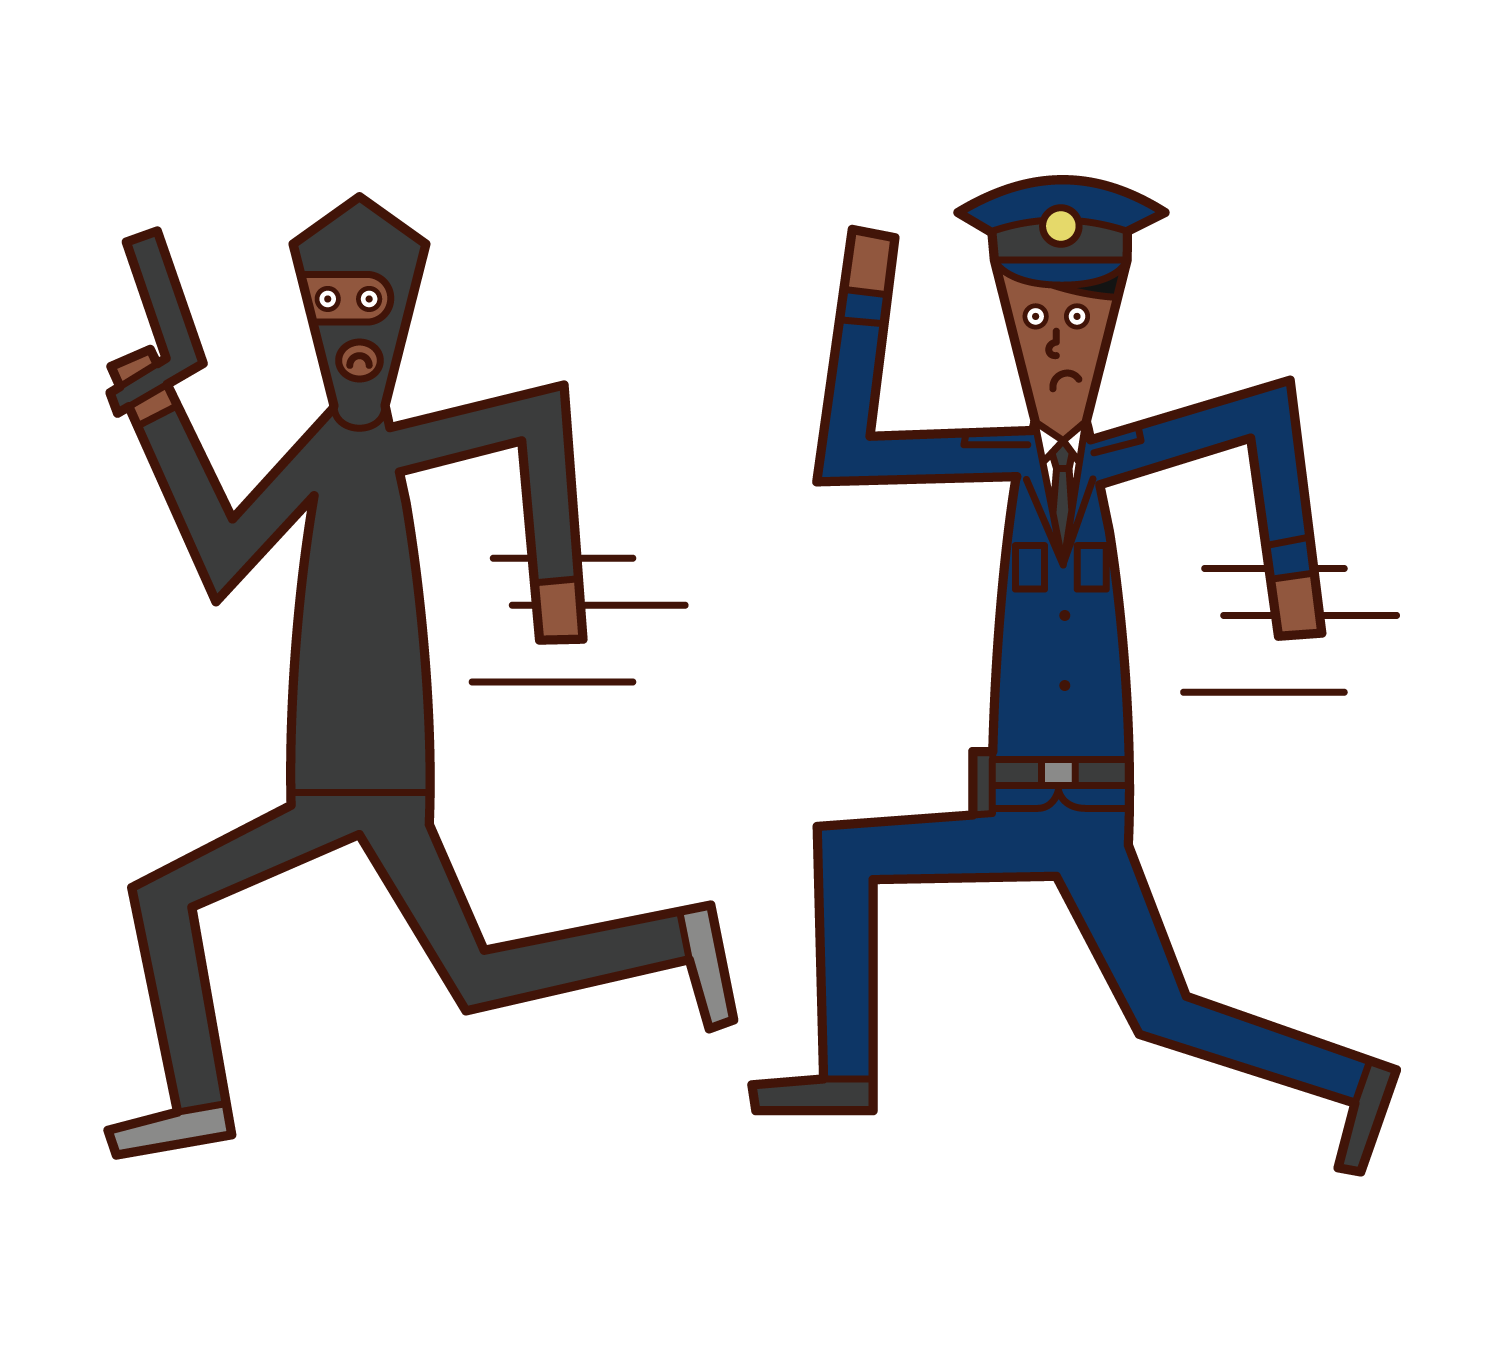 Illustration of a police officer (man) chasing a thief